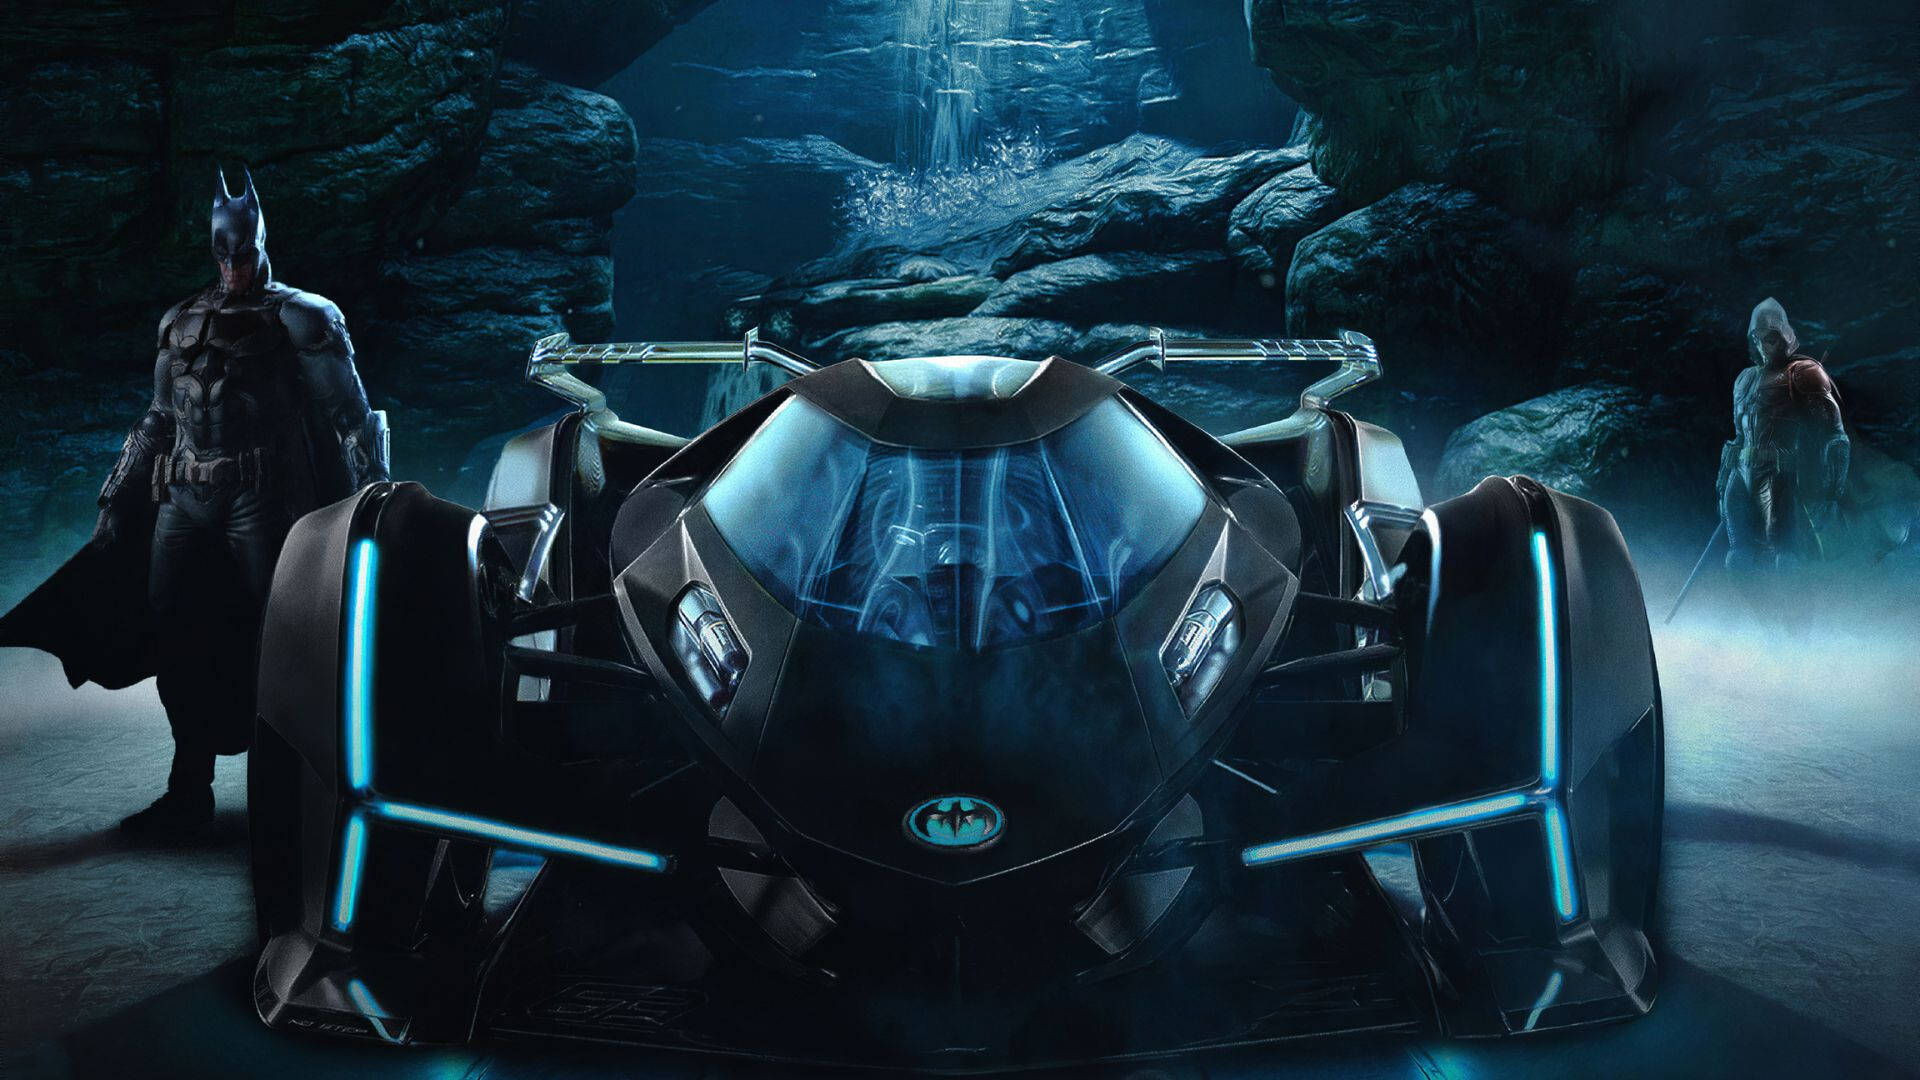 Batmobile In The Cave